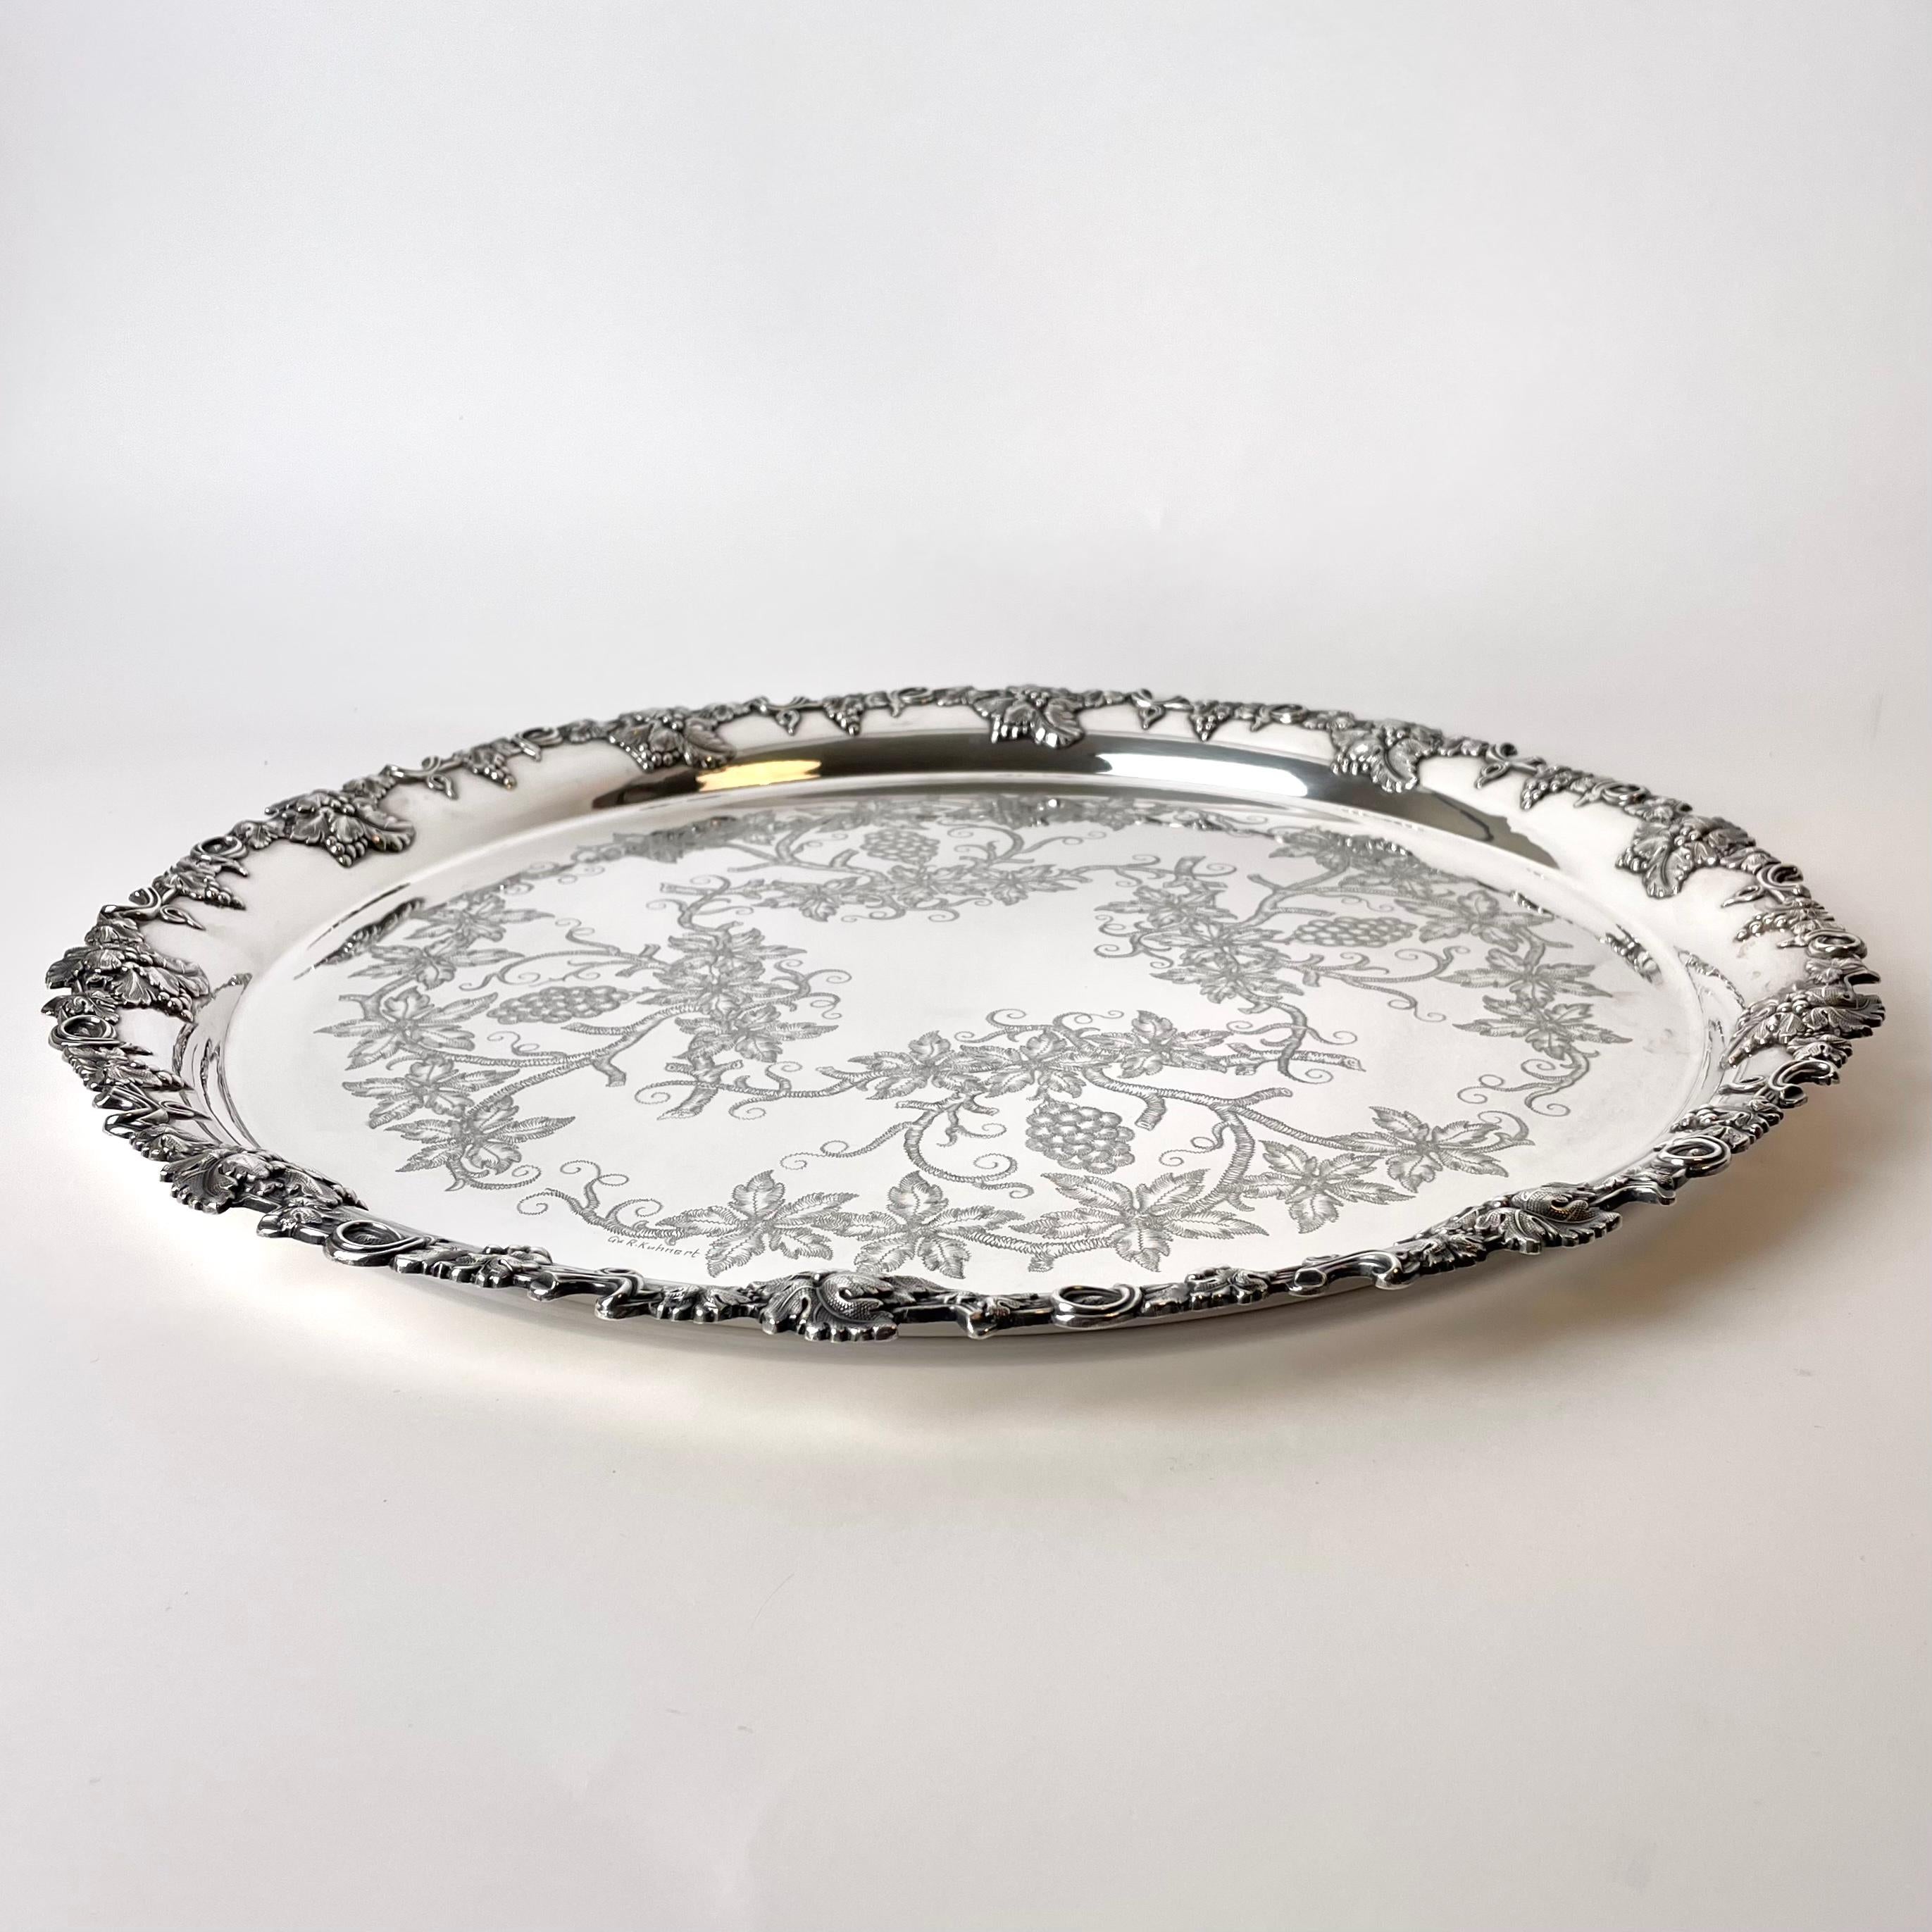 Serving Tray in Silver Plate with Decoration of Grapes by a.G Dufva, Sweden For Sale 4